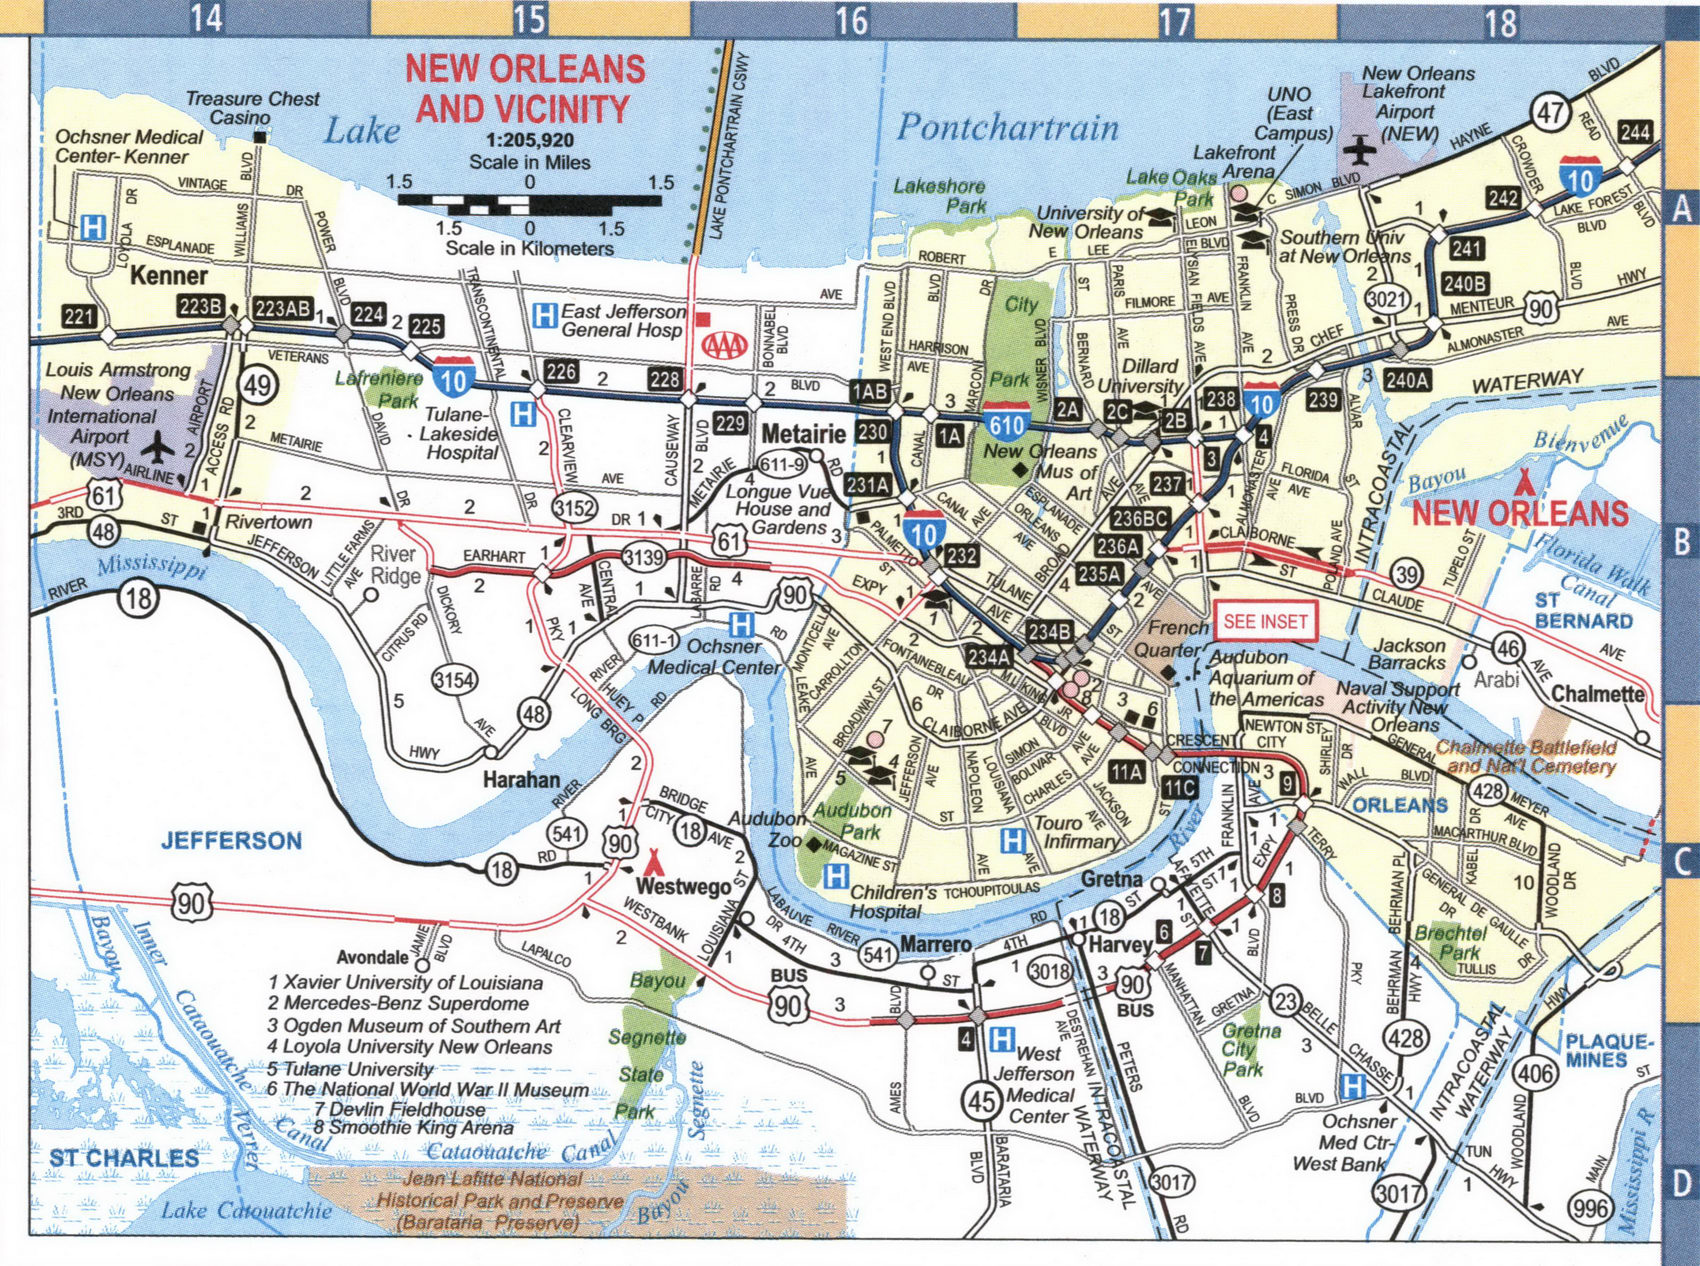 Map of New Orleans and vicinity